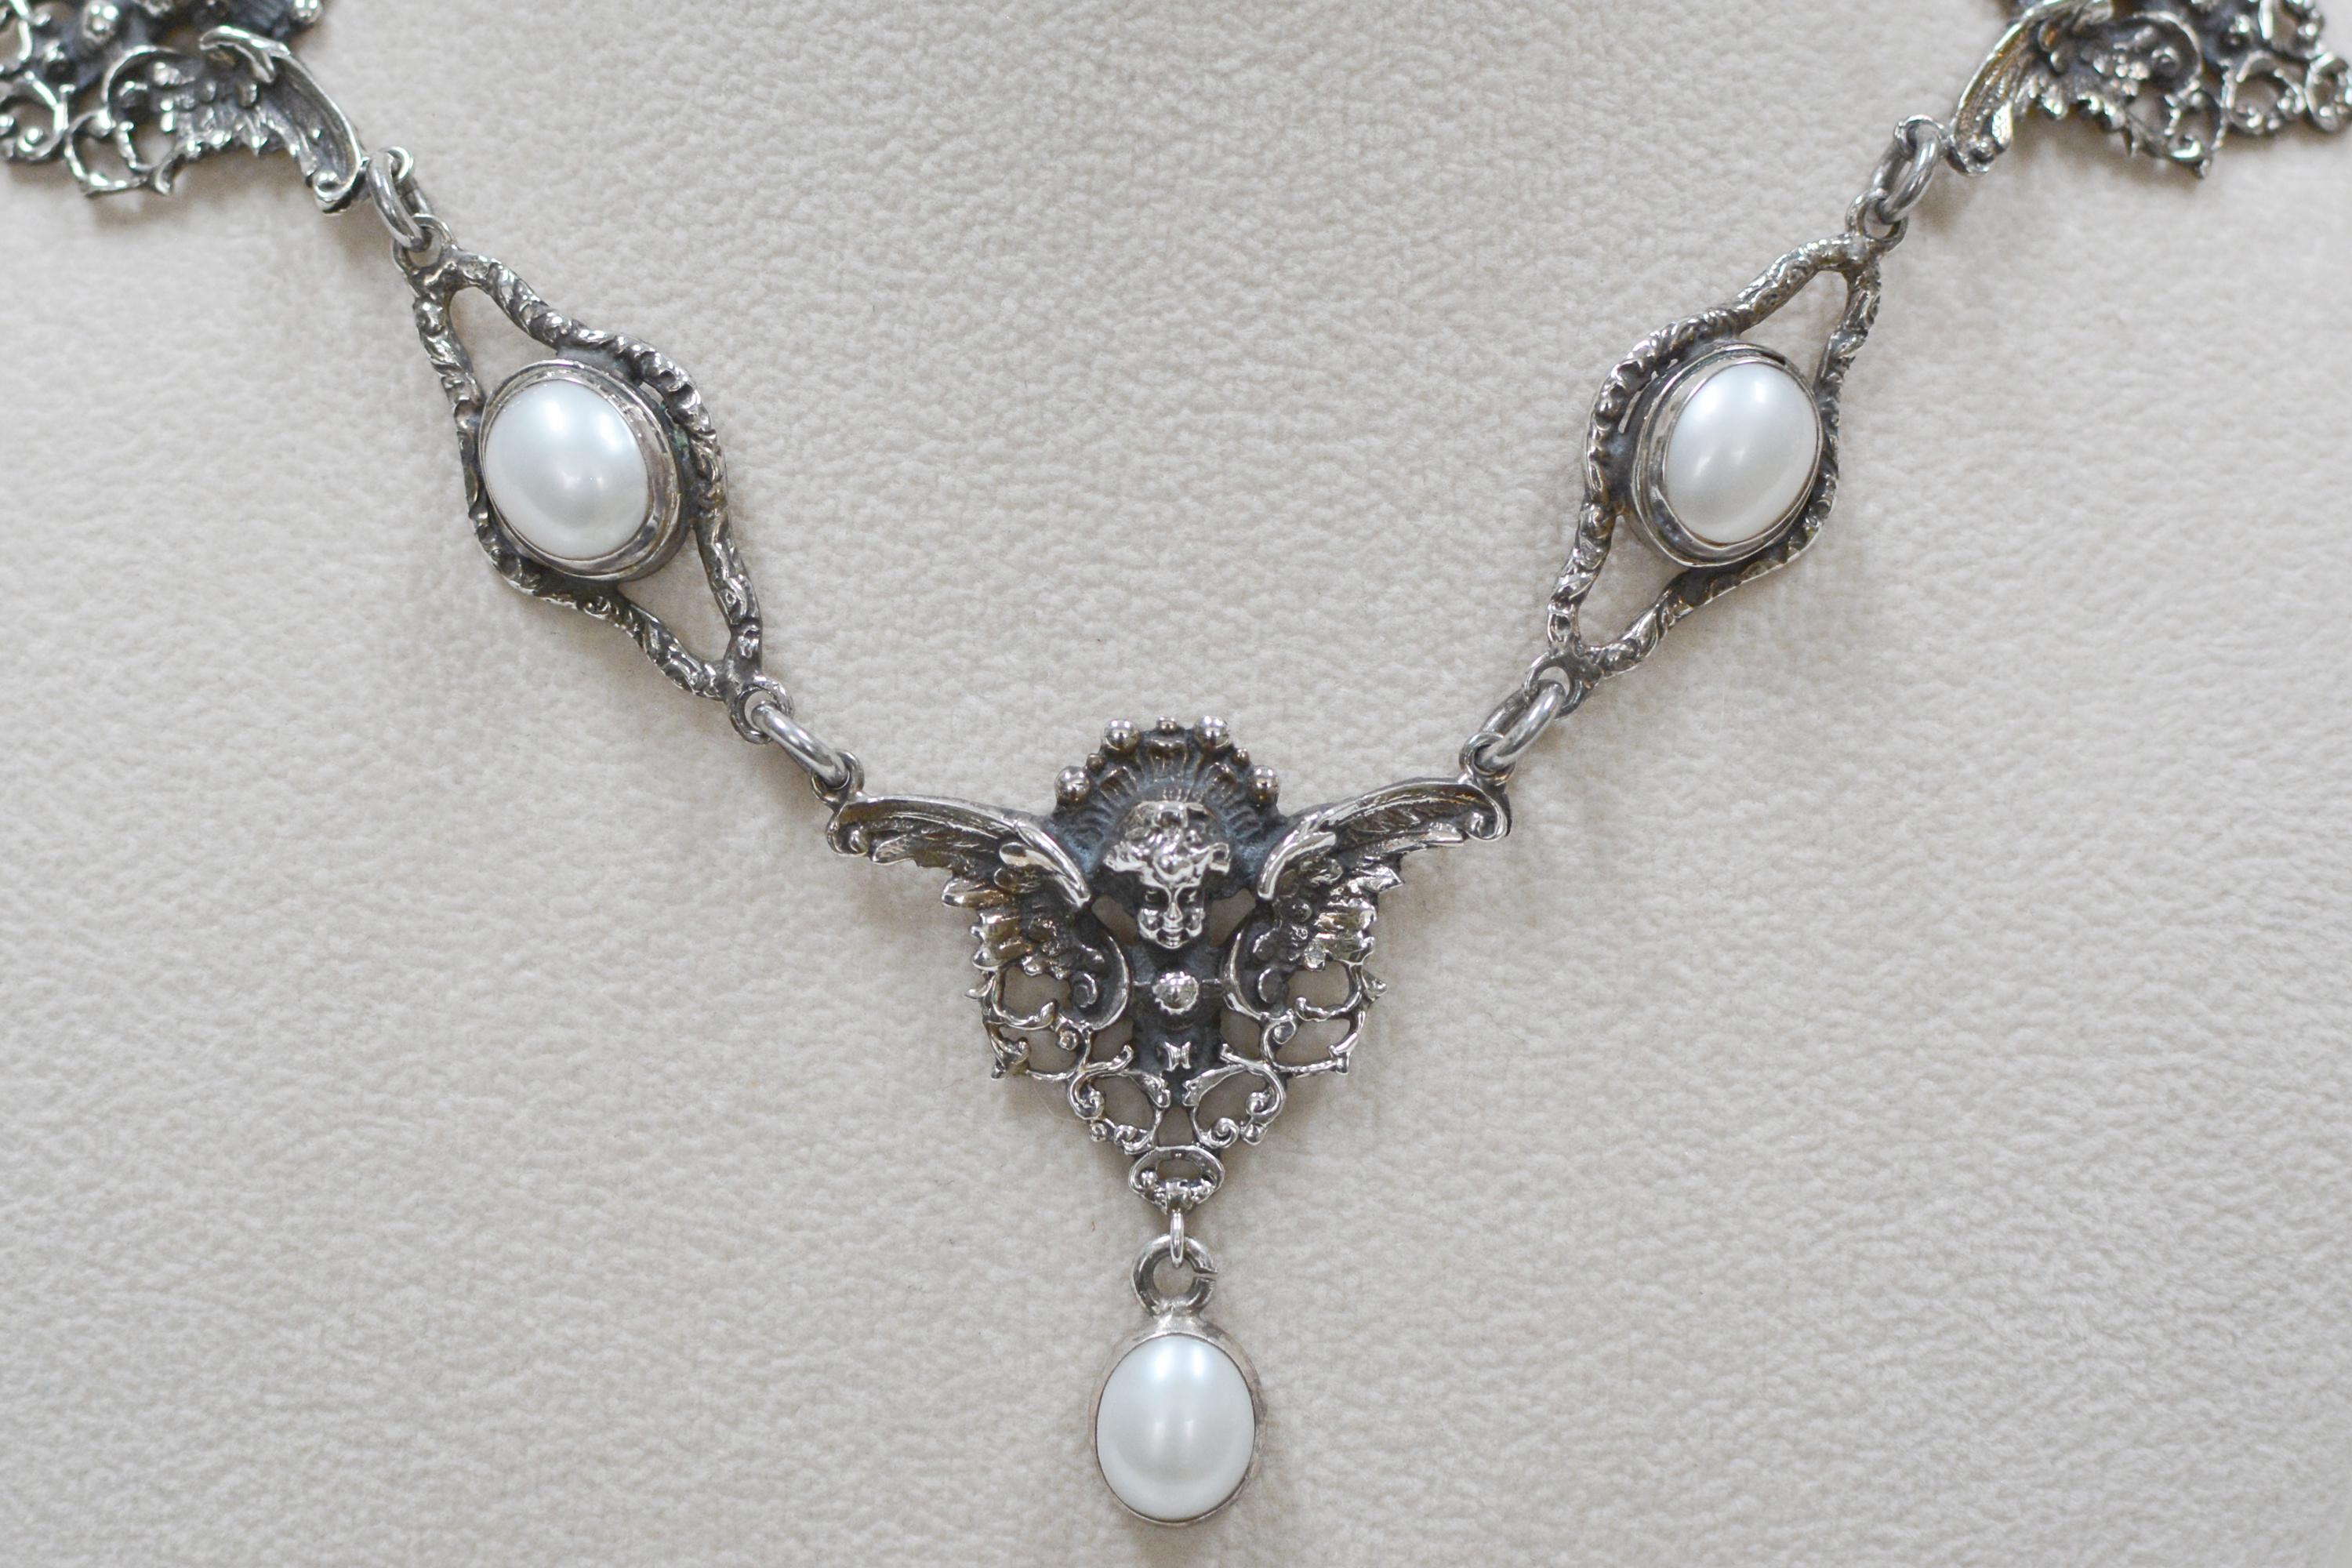 Baroque Jill Garber Collection Drop Necklace with Freshwater Pearls and Figural Angels